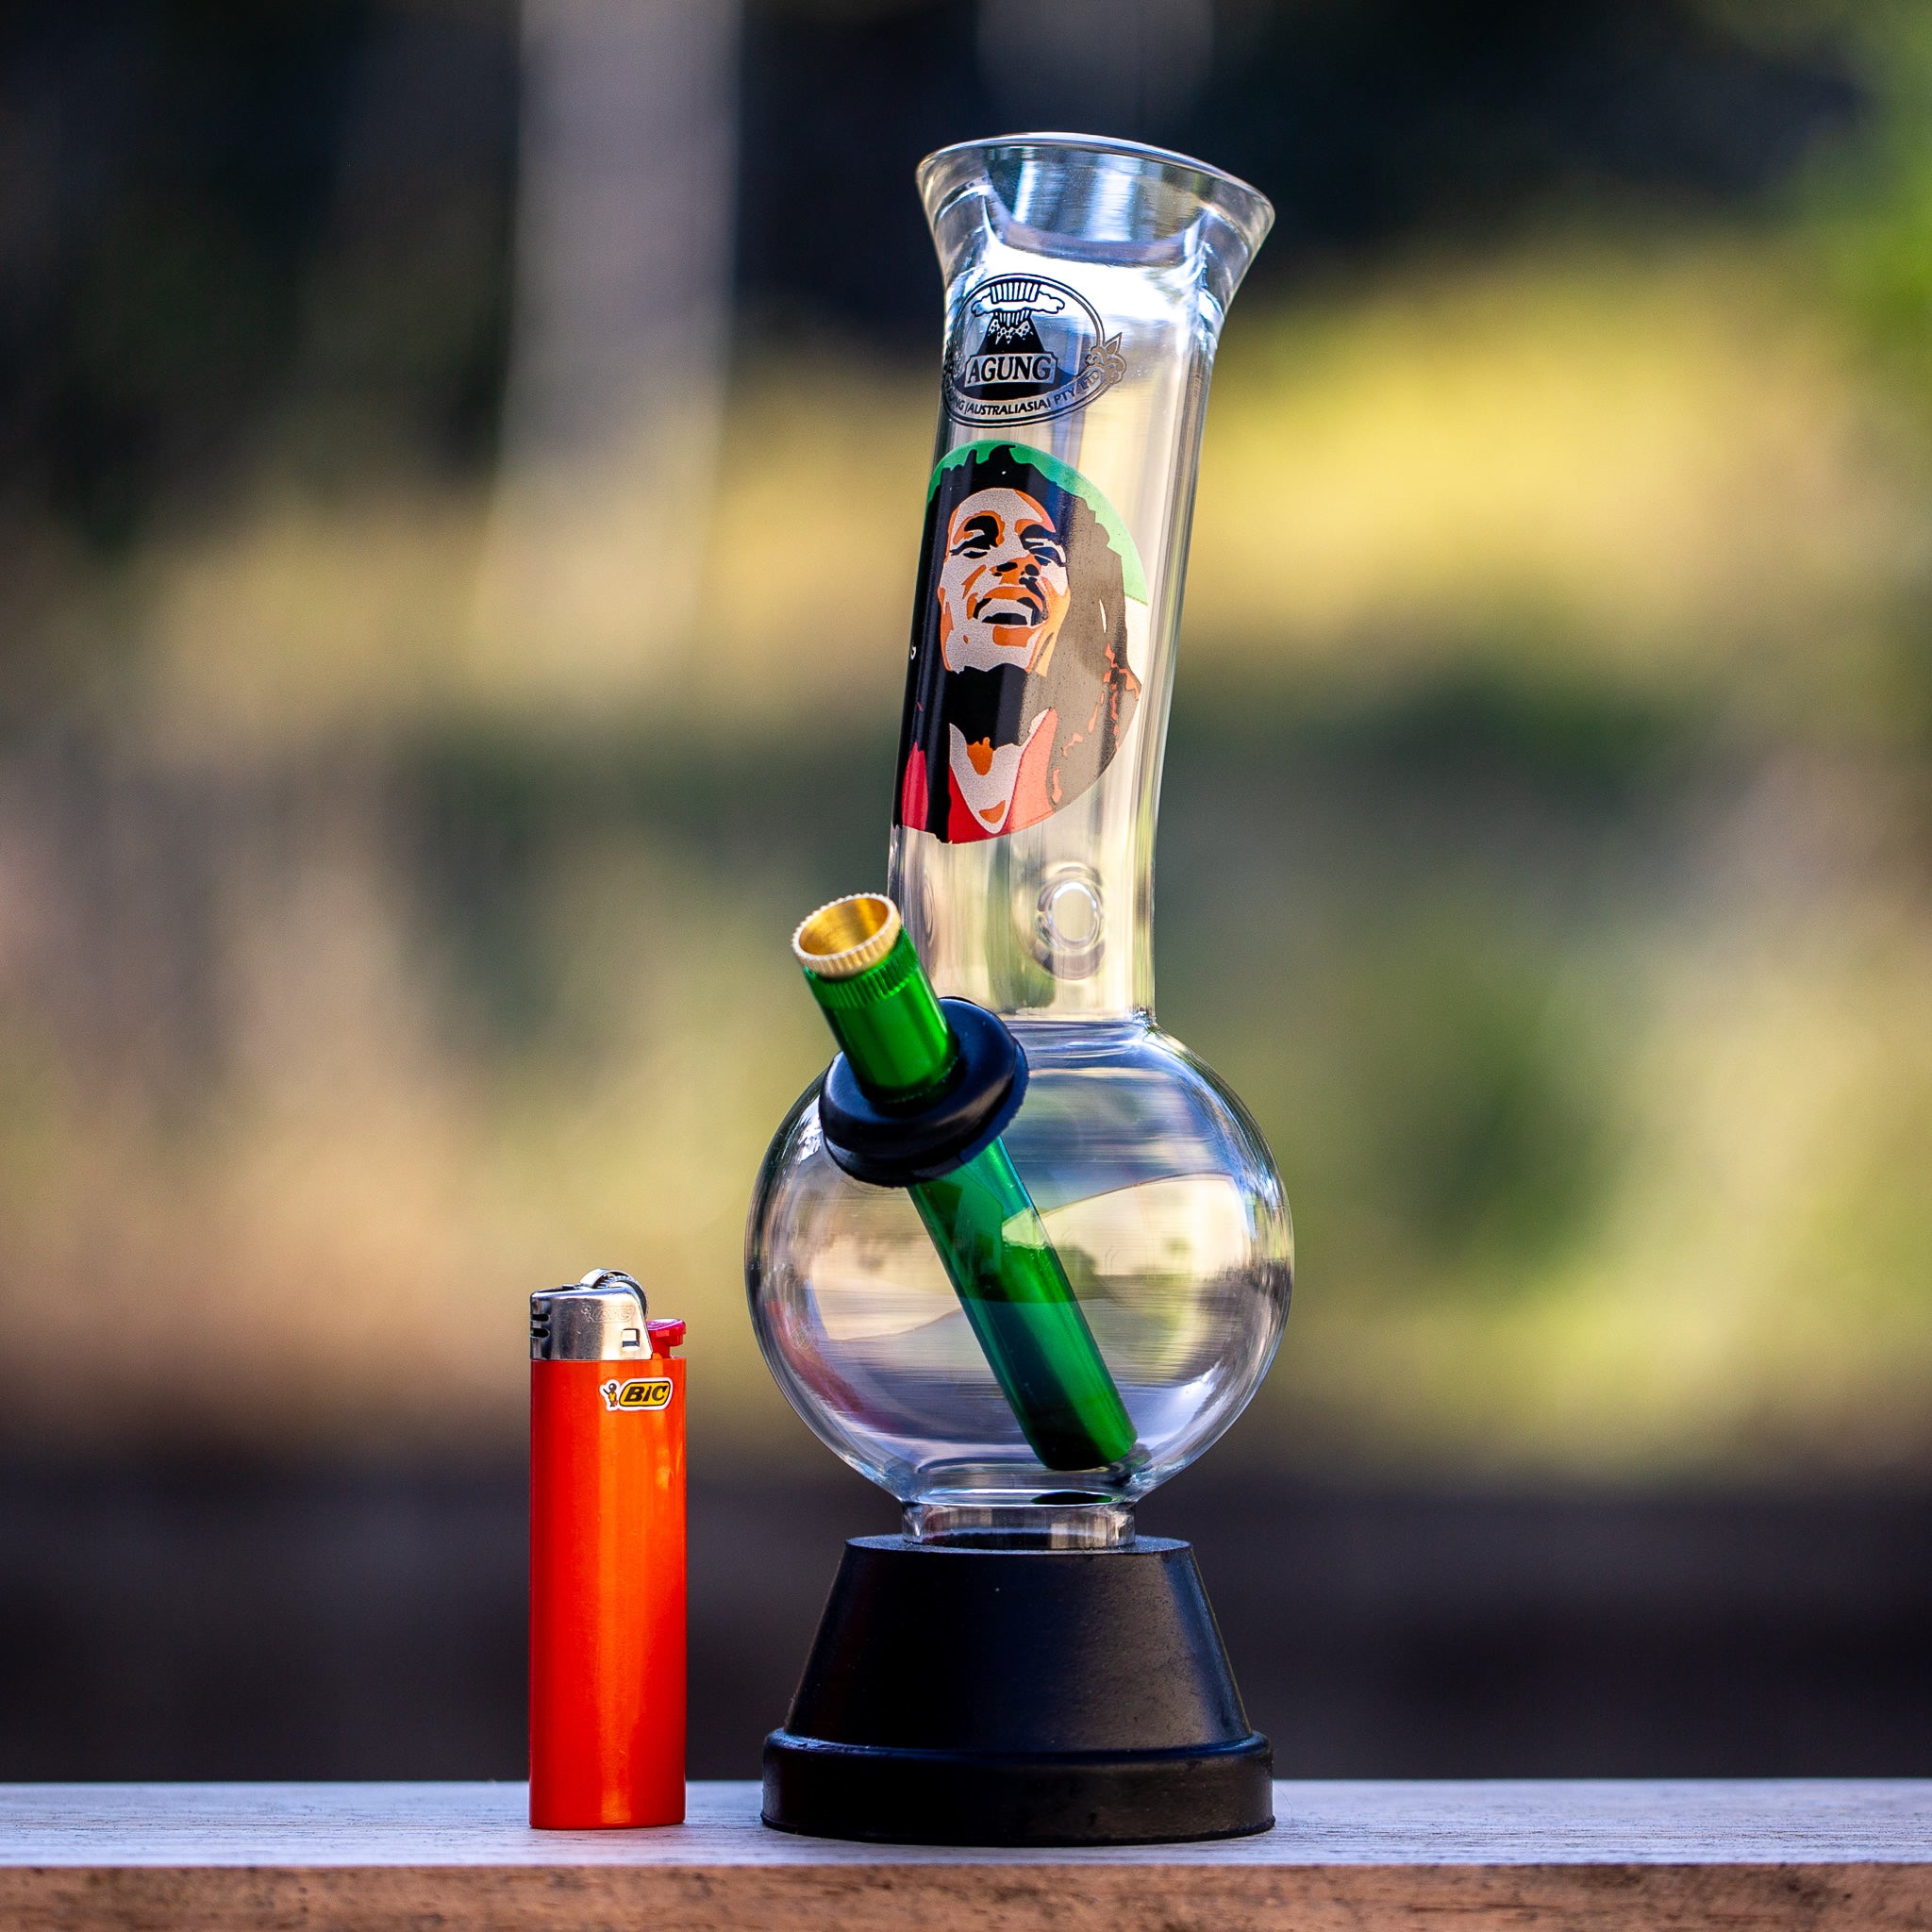  Agung bonza bong for weed smokers, available from Easy Bong Australia.